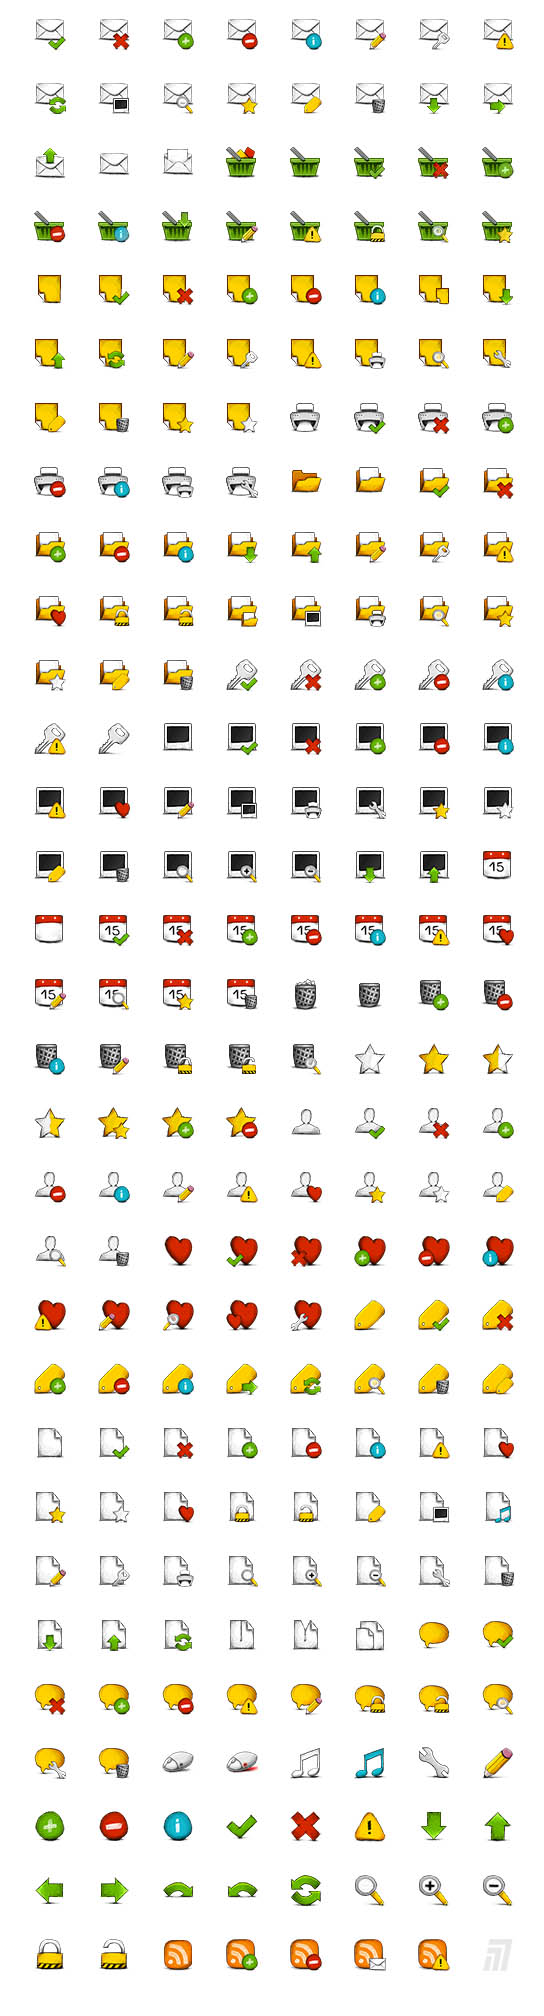 Free Icons Set: Huge Collection of Icon Sets